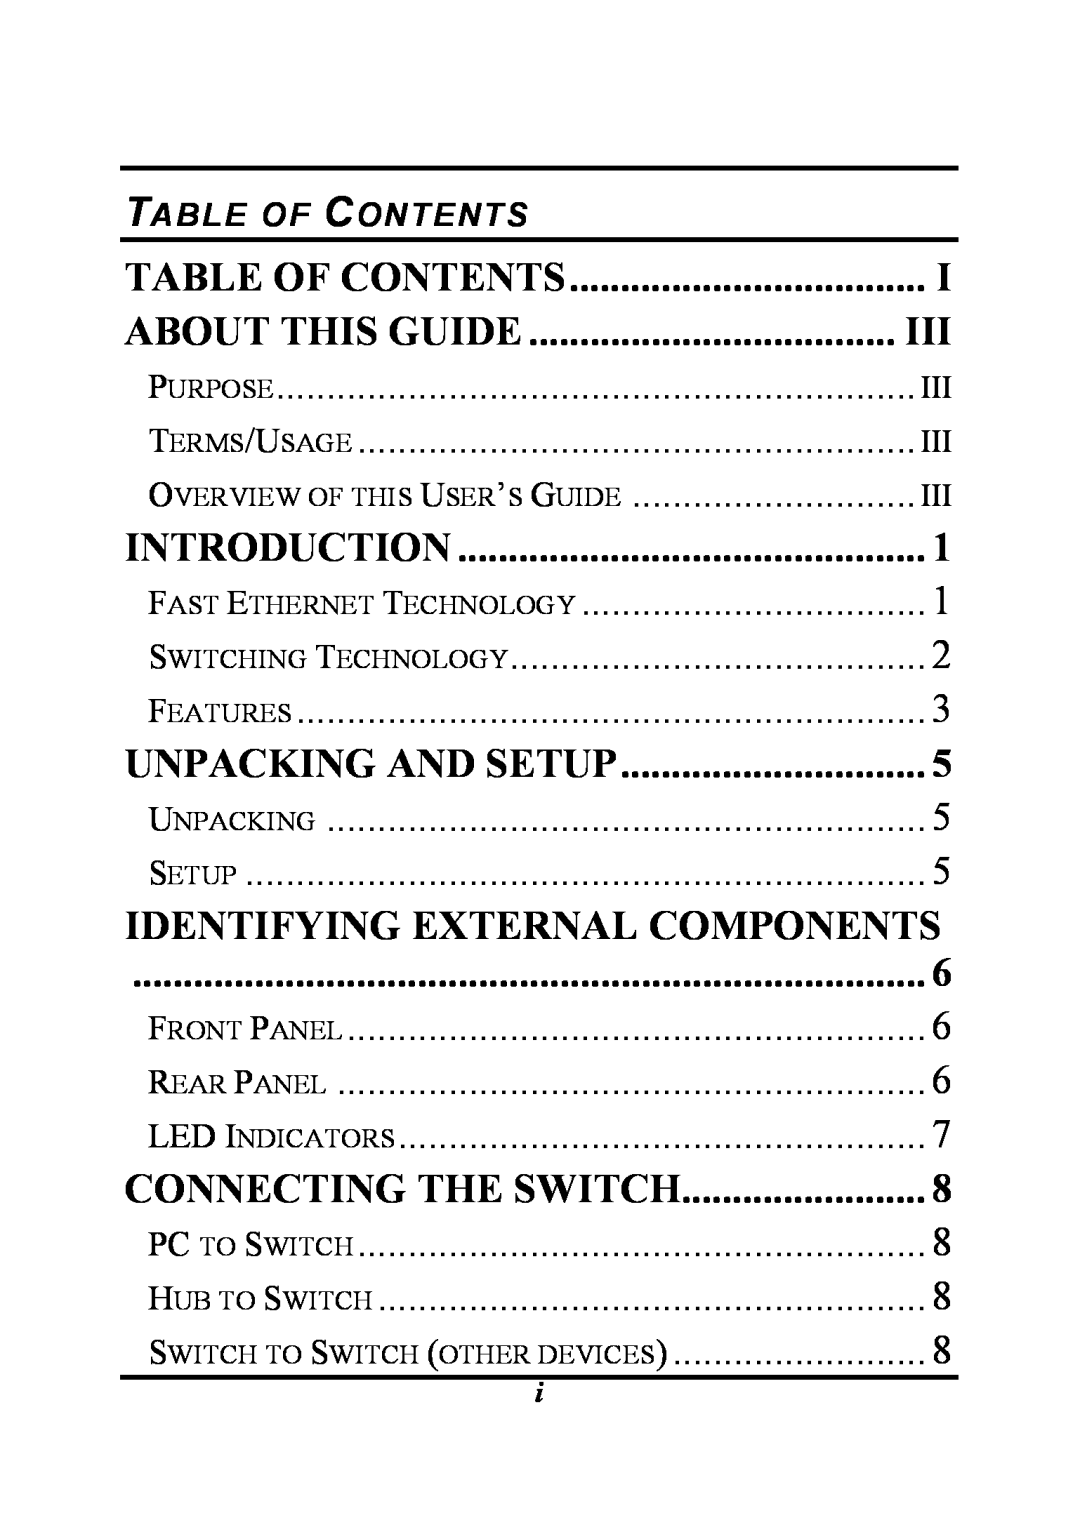 D-Link DSS-5 Identifying External Components, O Verview Of This U Ser ’ S G Uide, Table Of Contents, About This Guide 